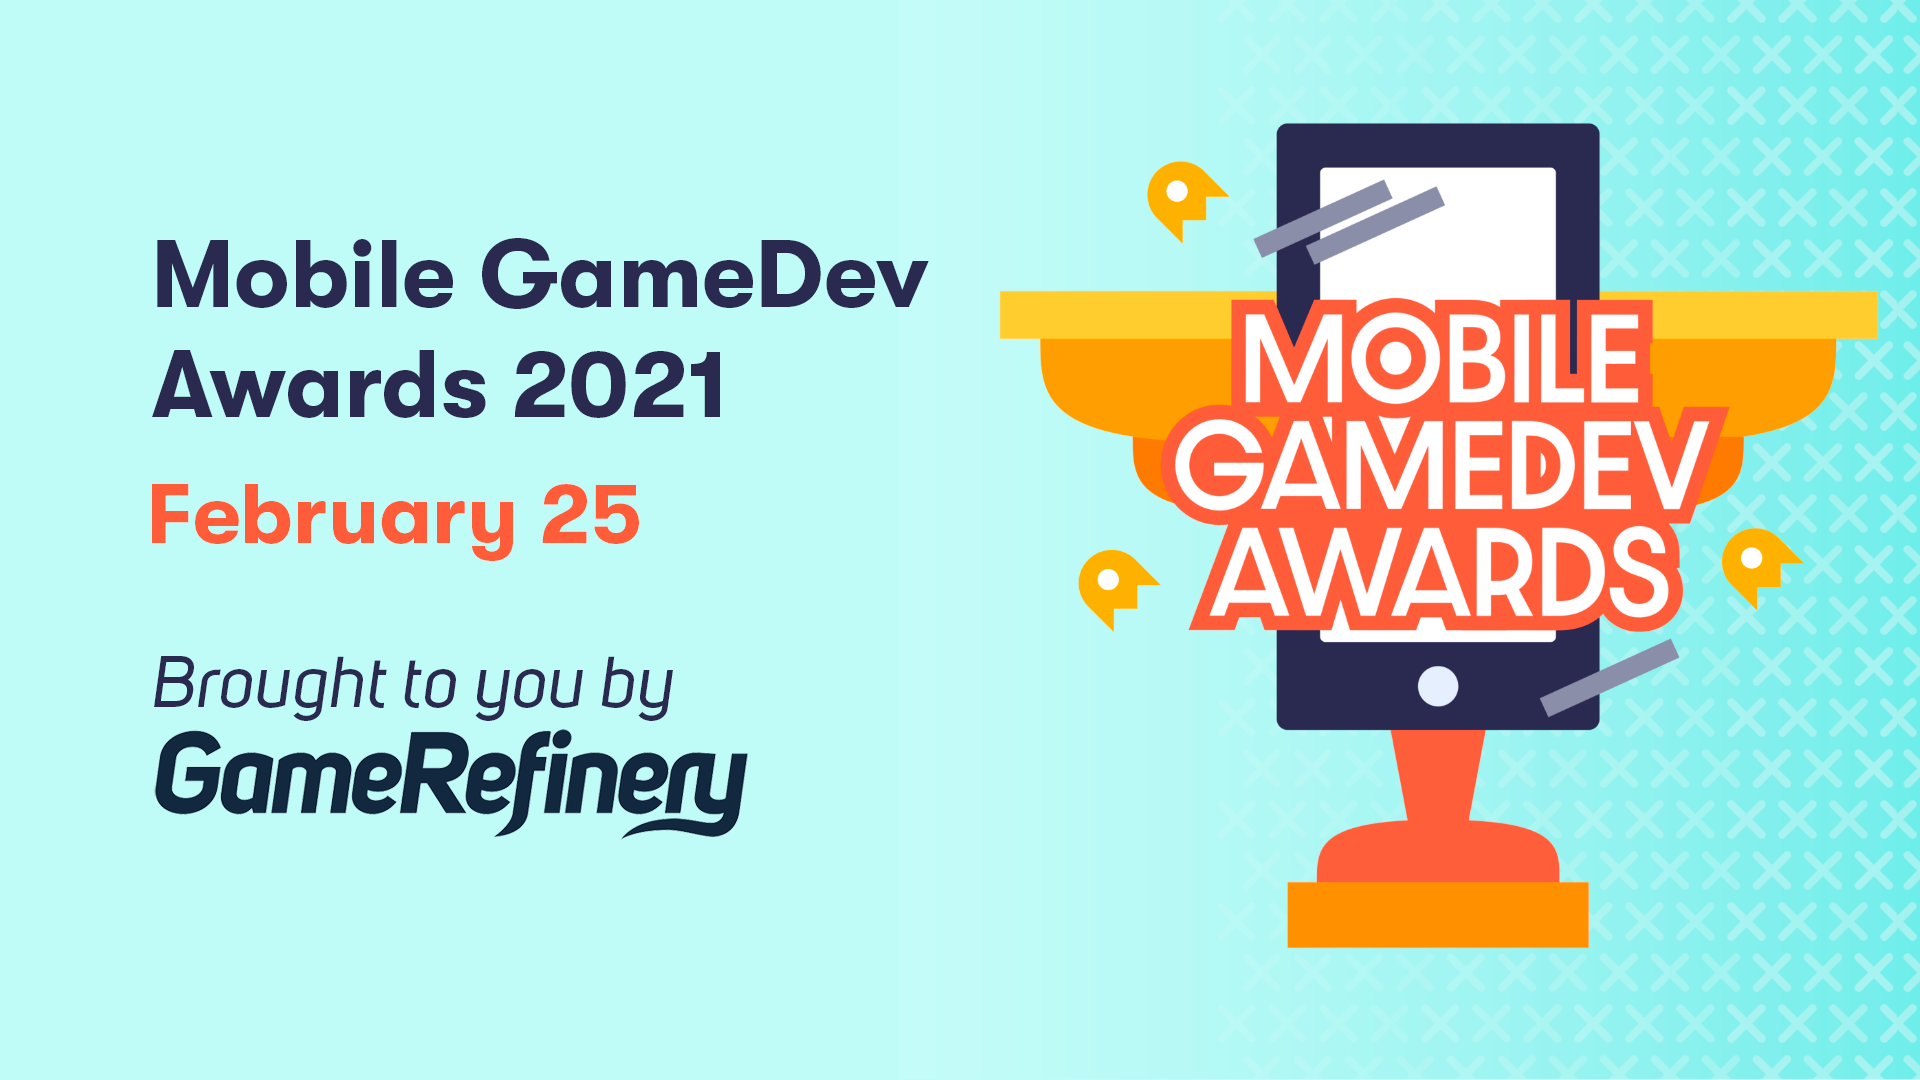 The Finalists for 2021 - Mobile Games Awards